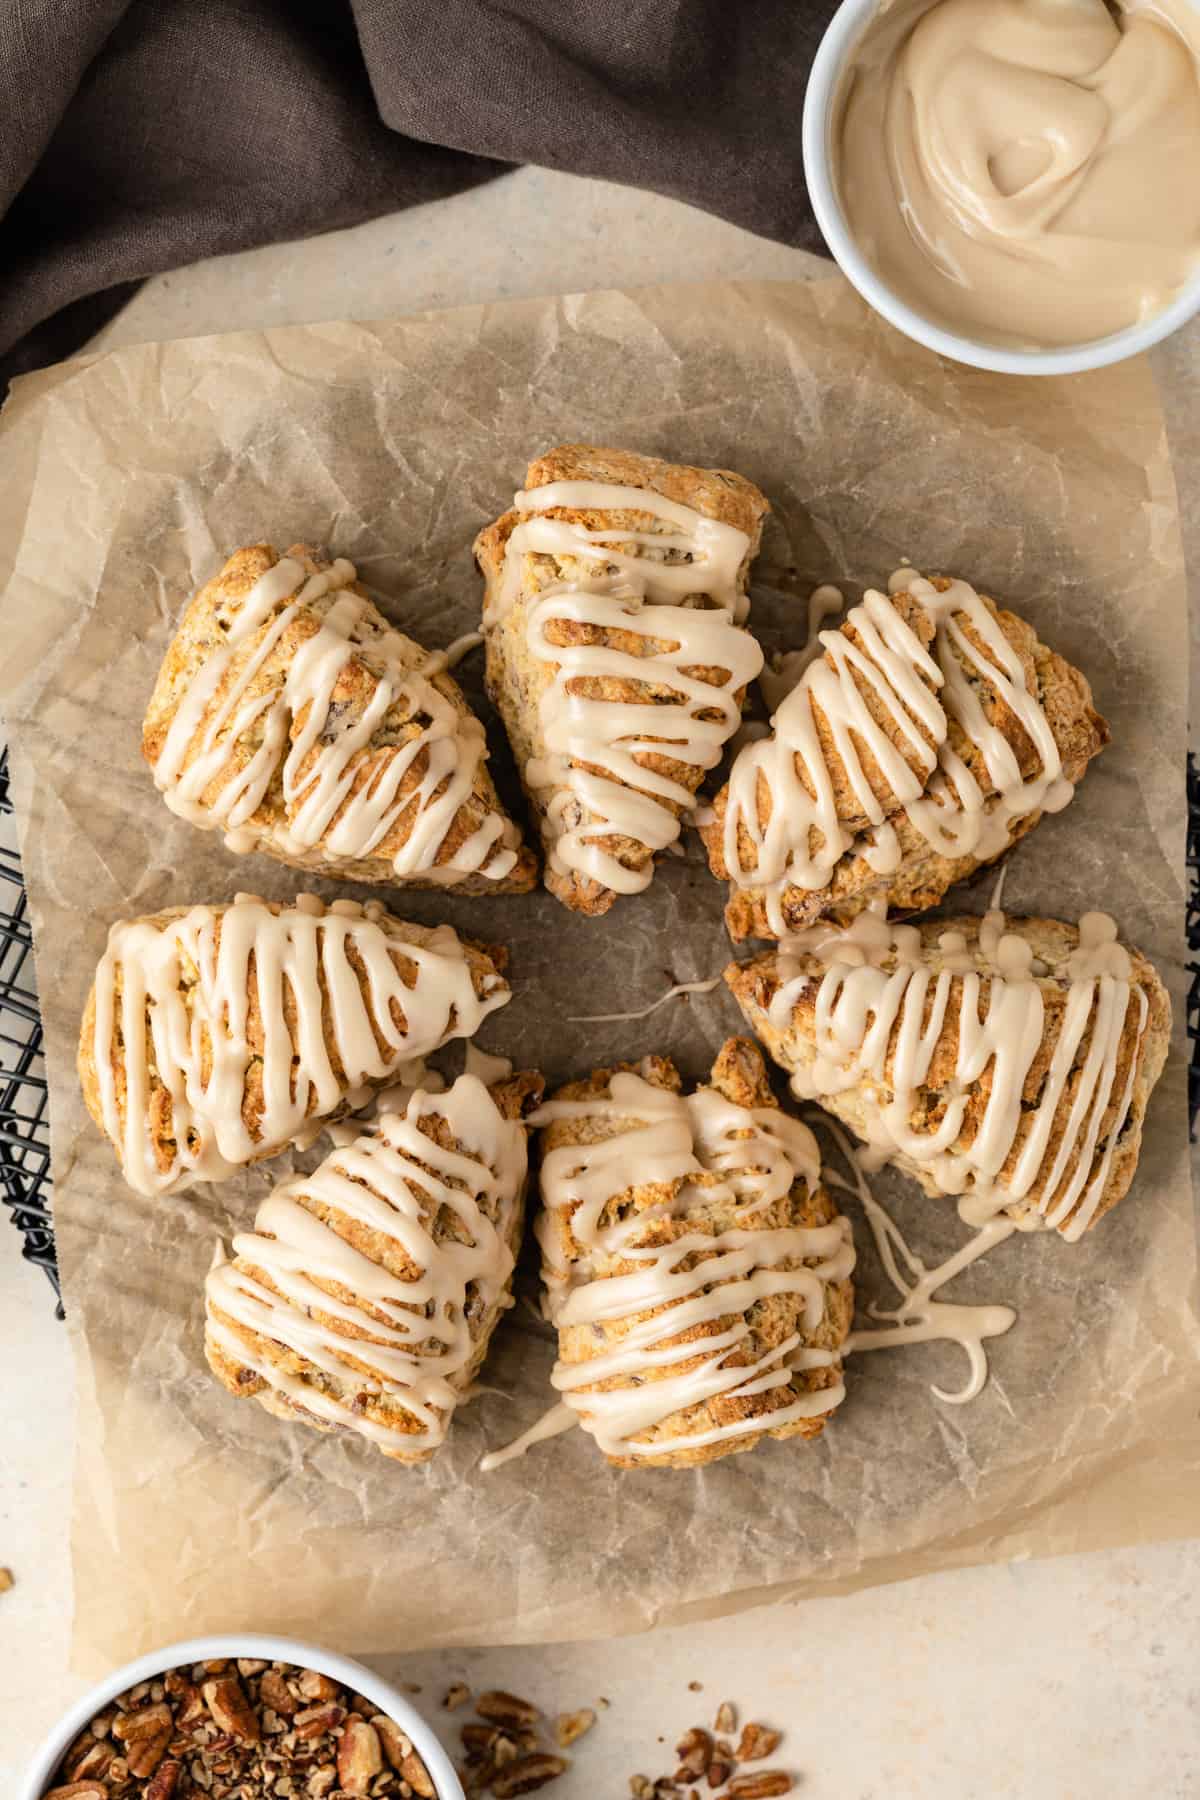 Scones drizzled with maple glaze